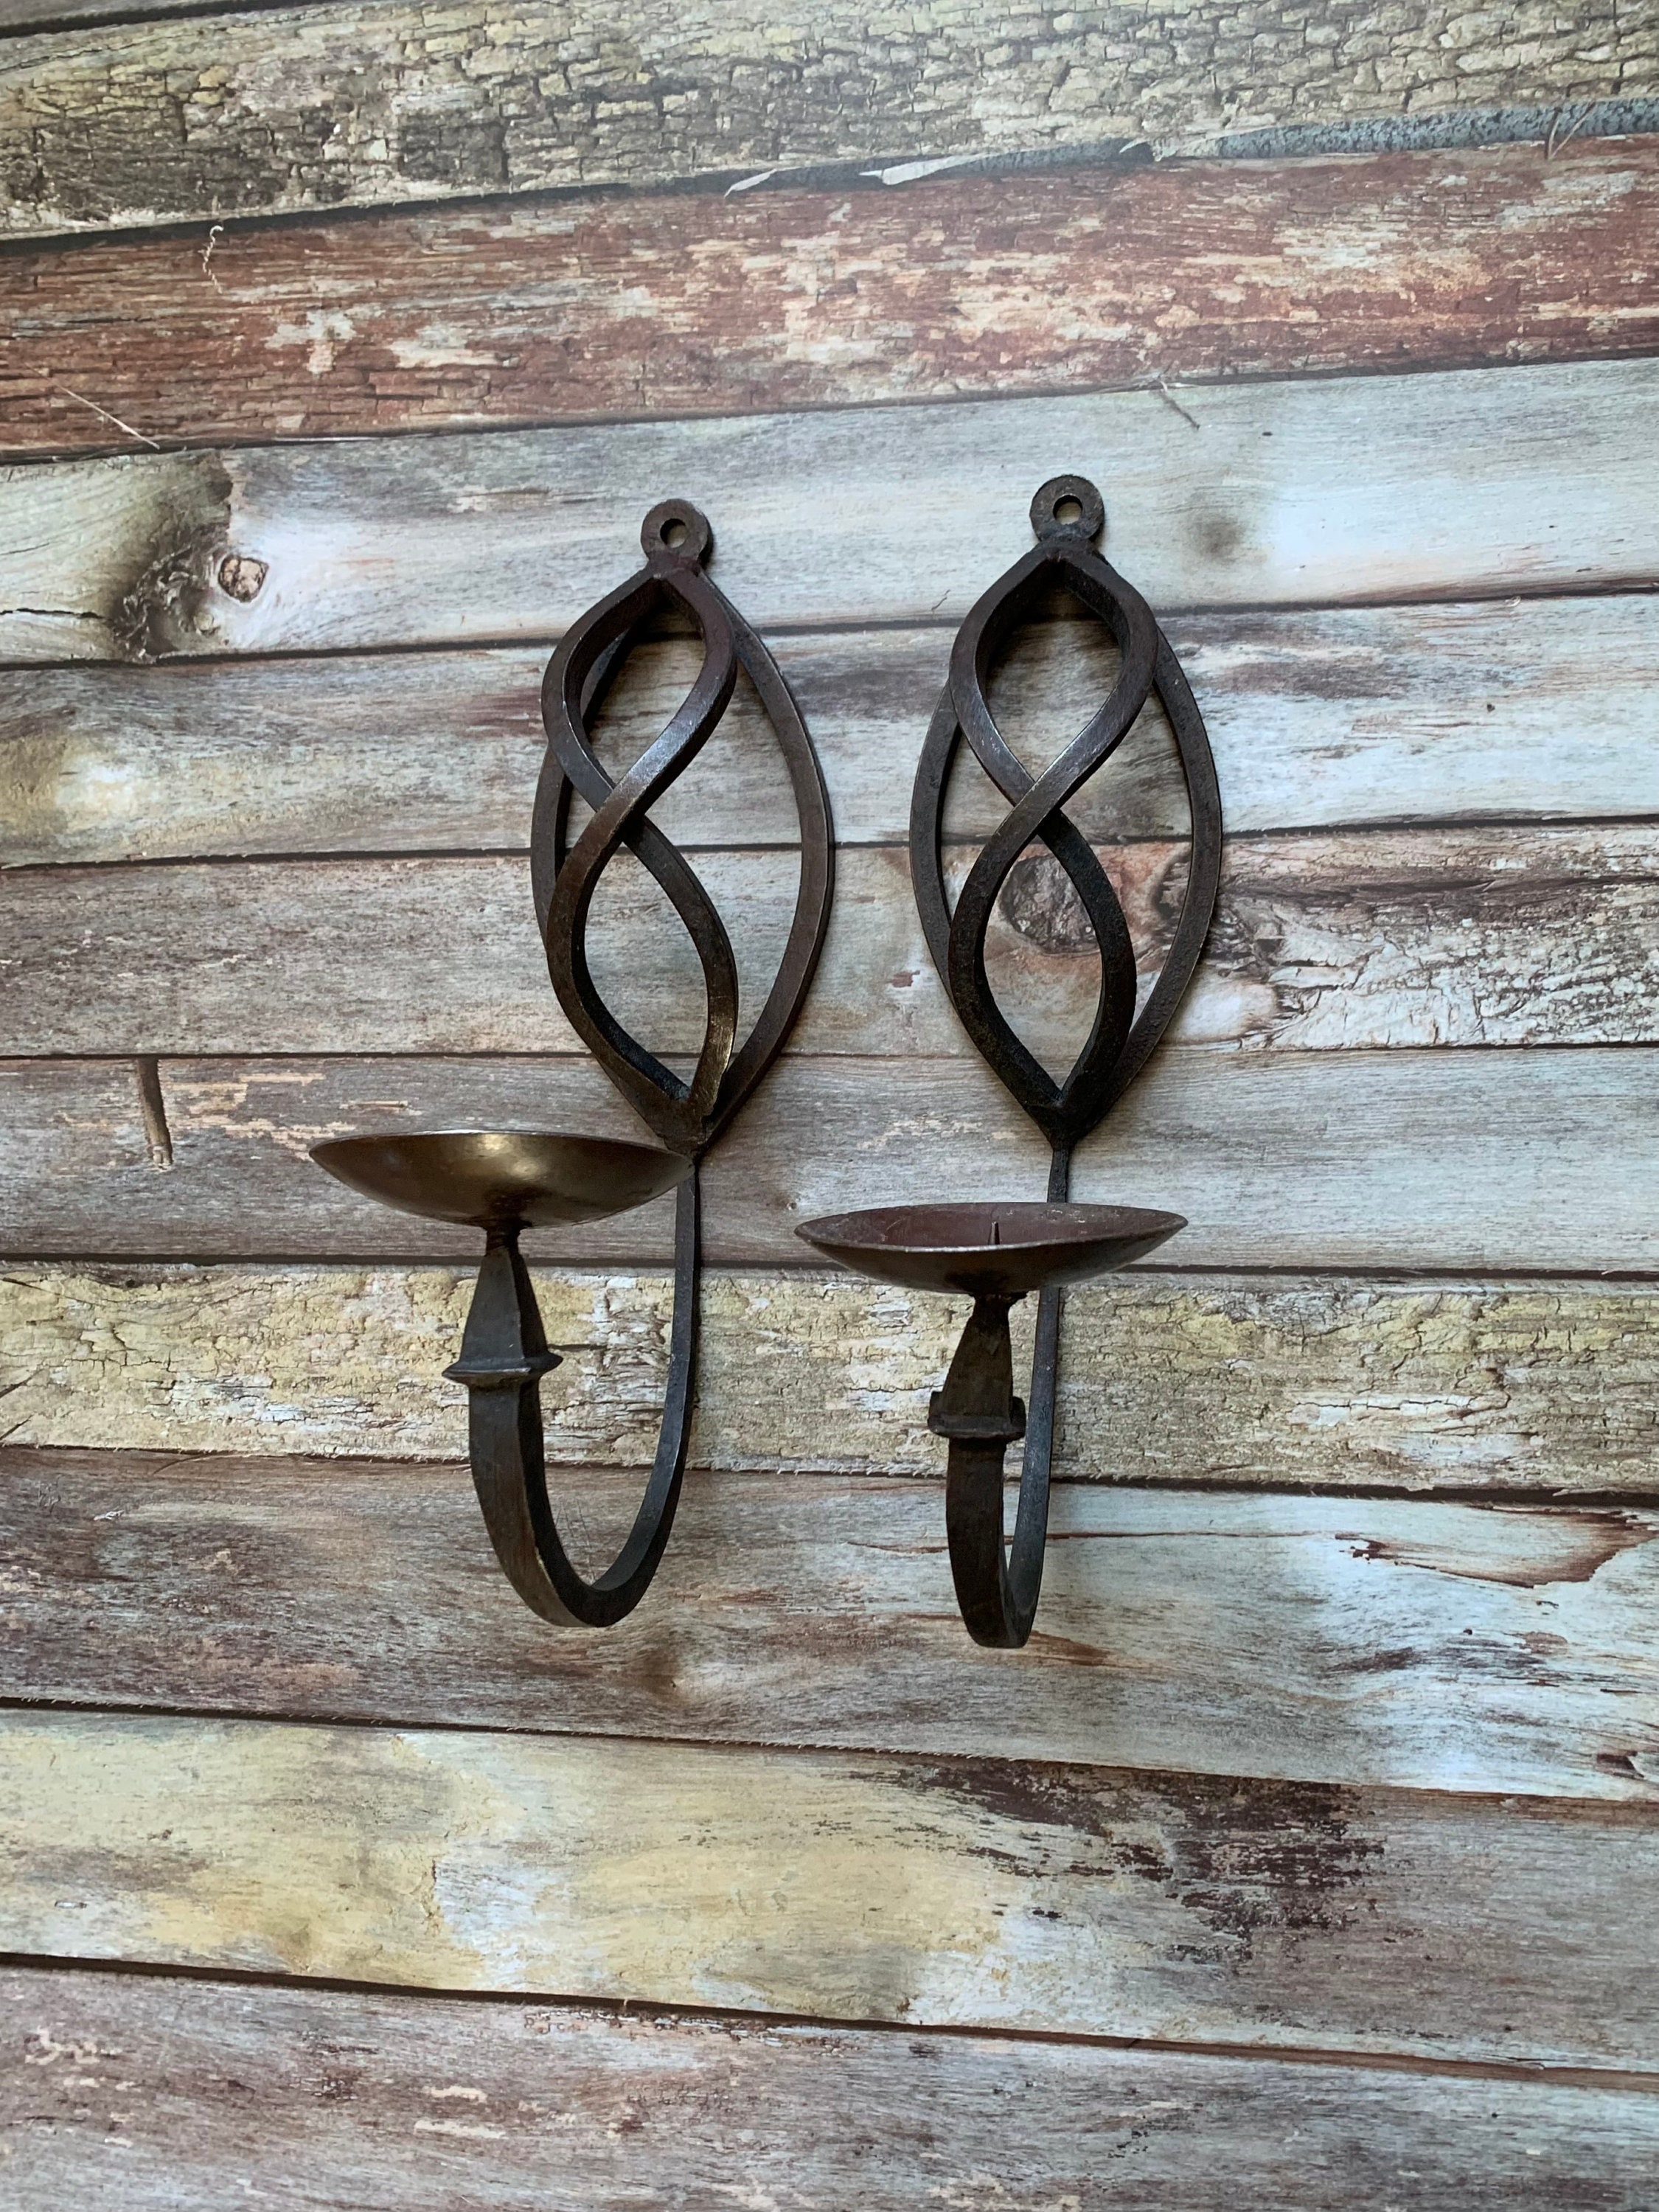 2x Rustic Wall Hanging Wrought Iron Candle Holders, Forged Iron